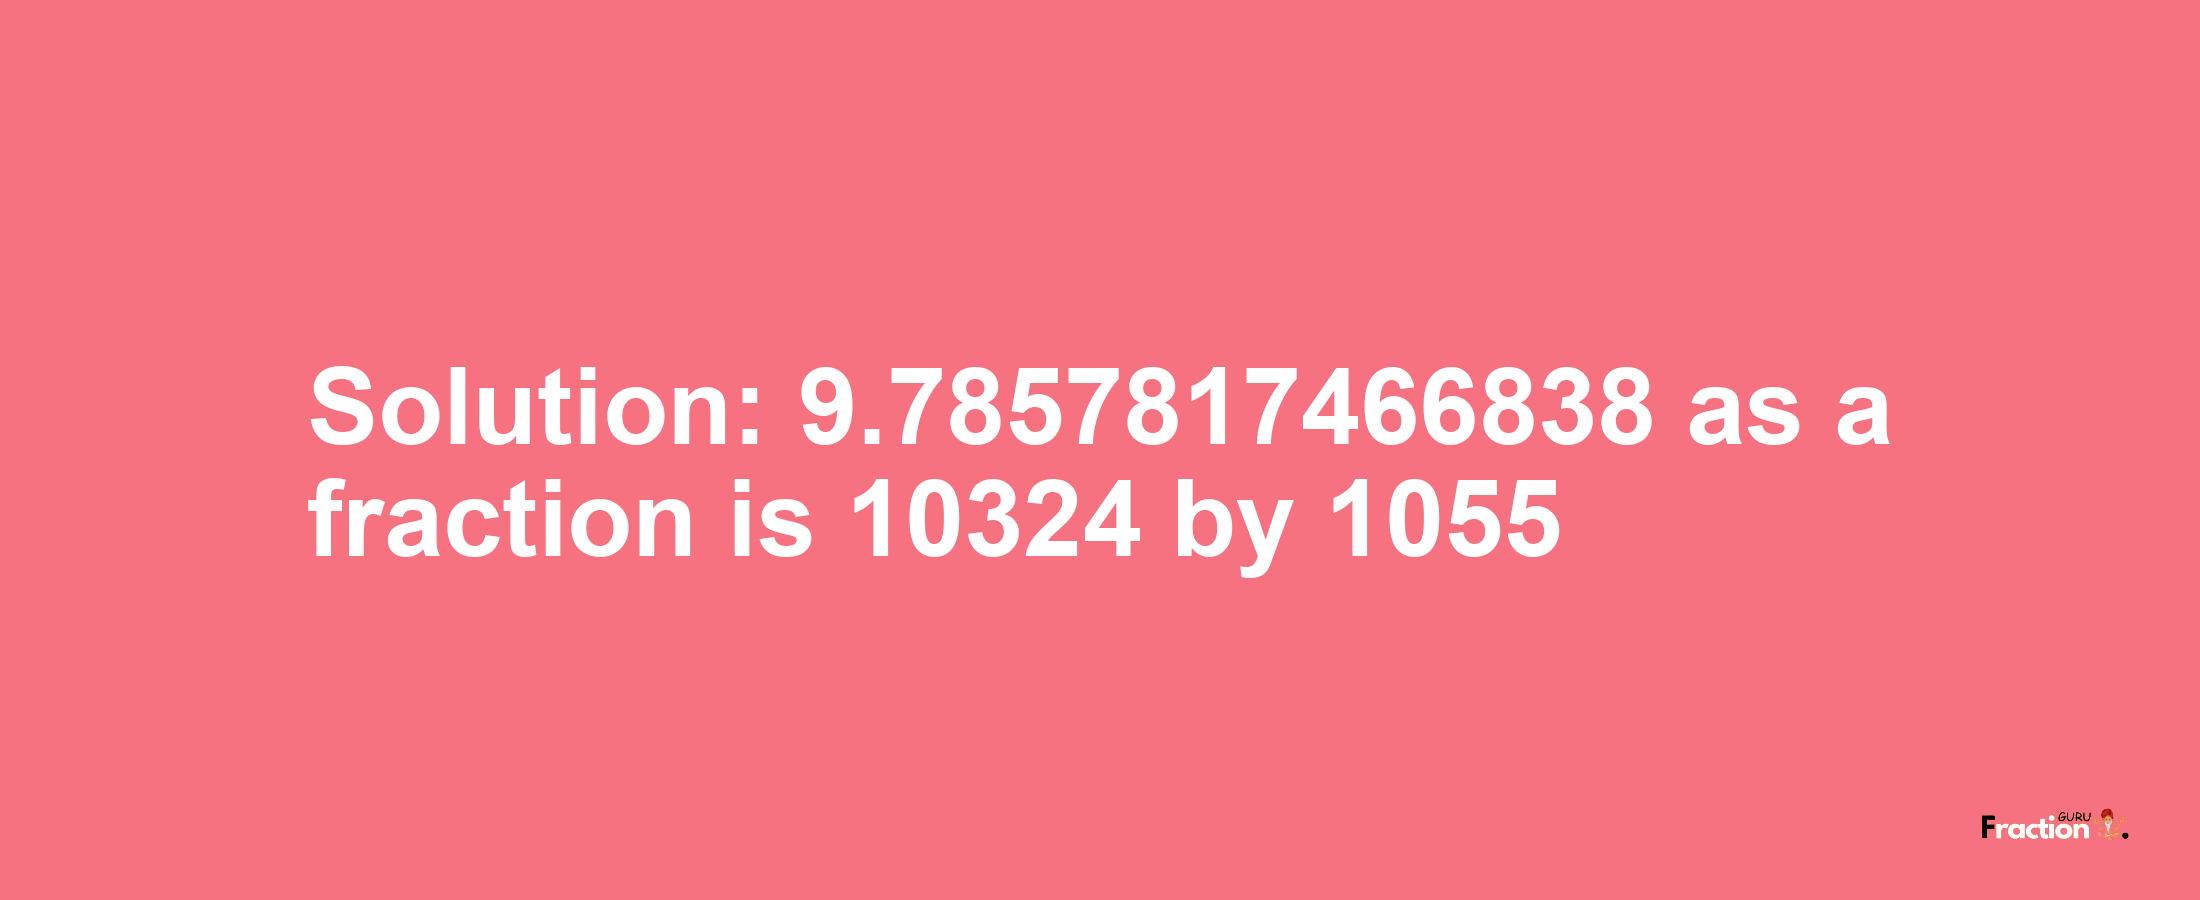 Solution:9.7857817466838 as a fraction is 10324/1055